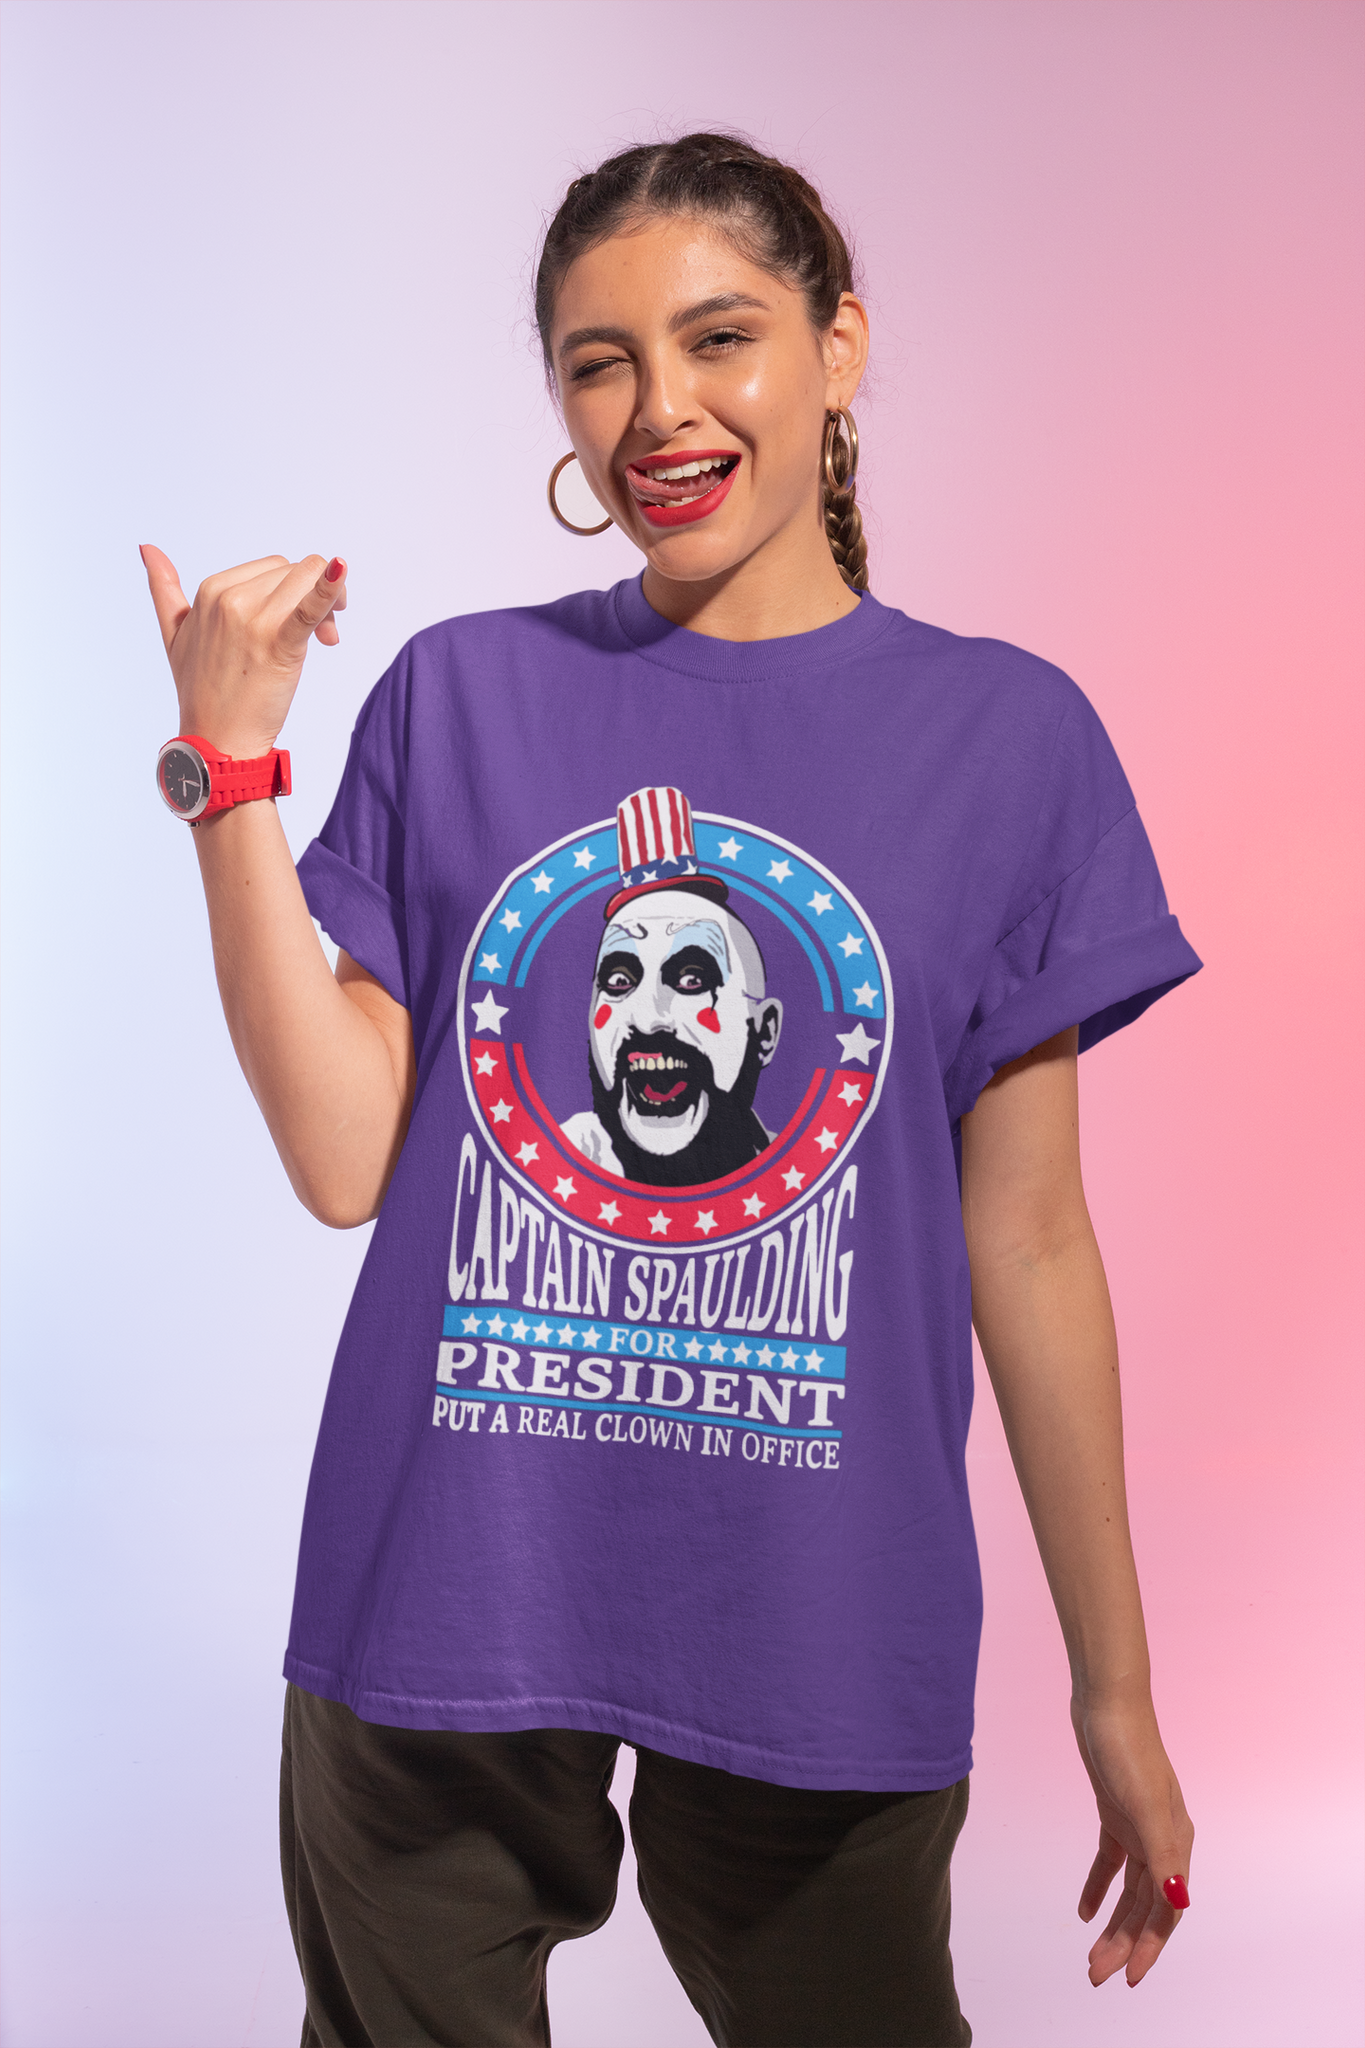 House Of 1000 Corpses T Shirt, Put A Real Clown In Office Tshirt, Captain Spaulding For President T Shirt, Halloween Gifts